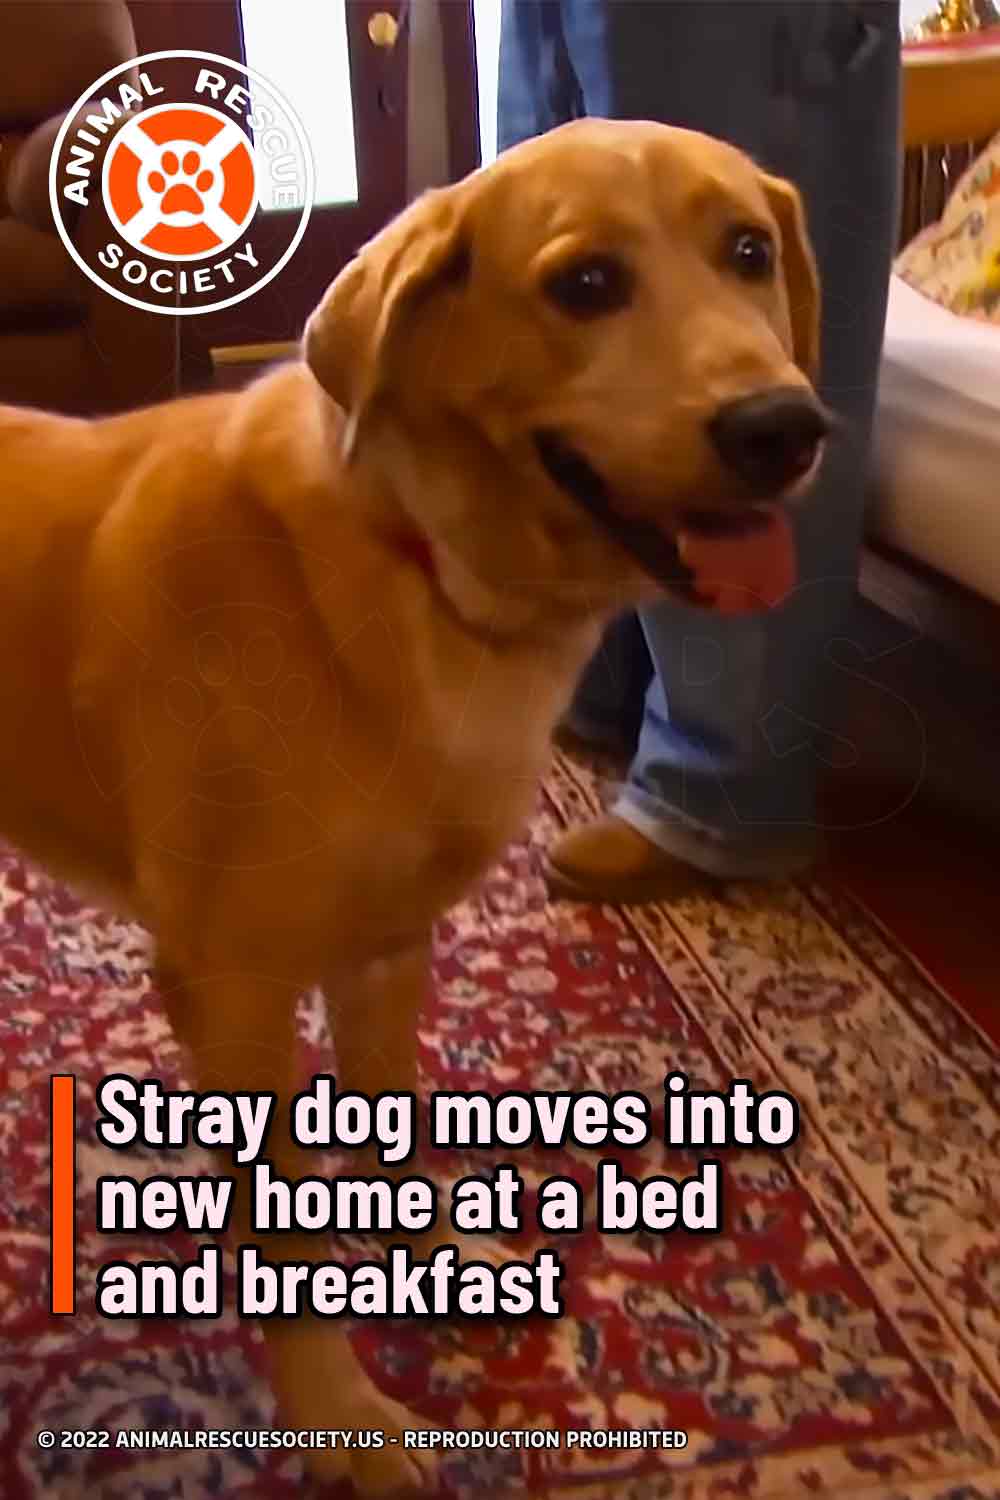 Stray dog moves into new home at a bed and breakfast